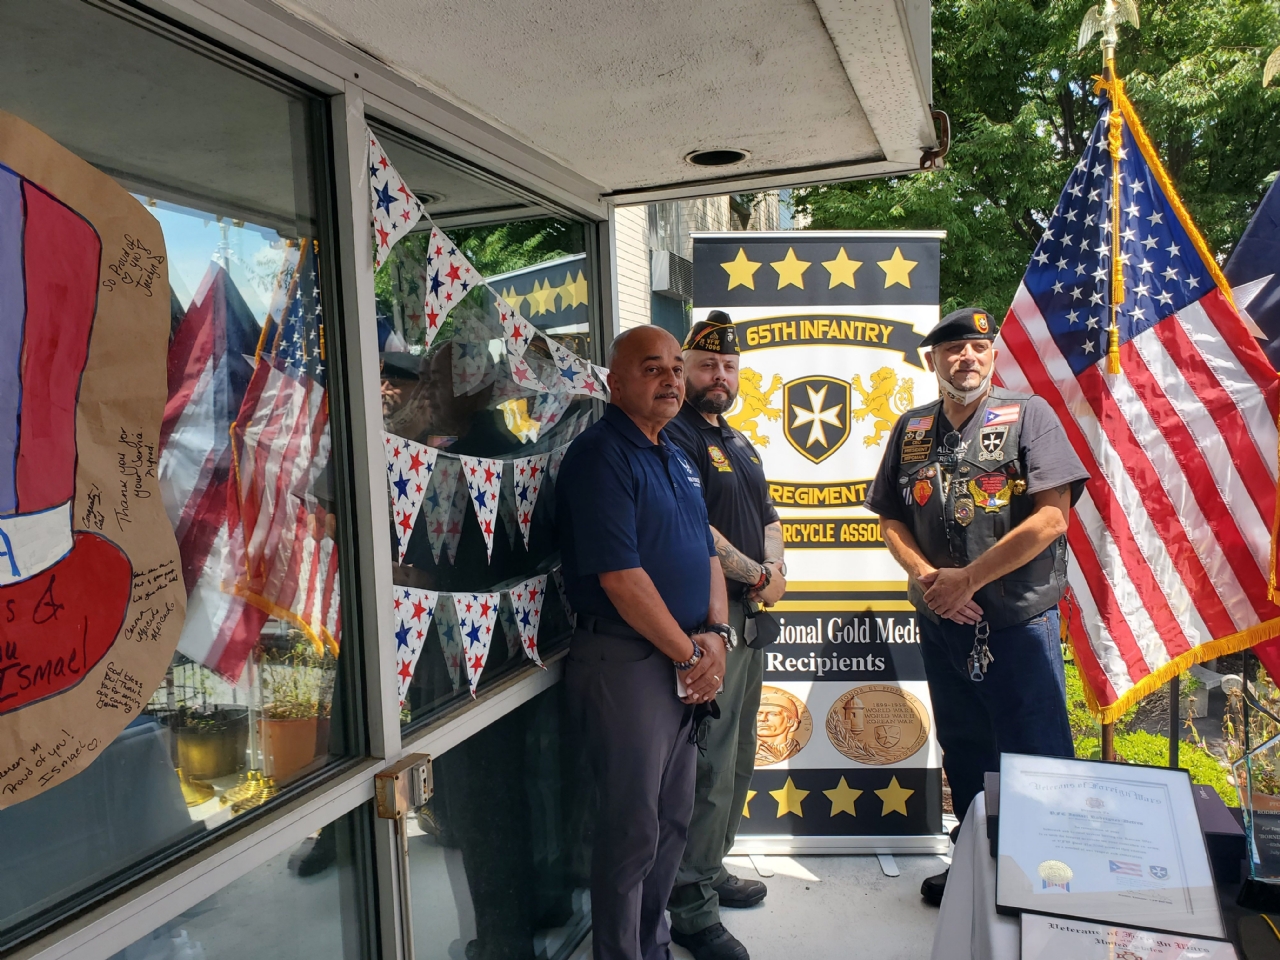 Retired USAF Master Sergeant & Post Life Member Rodriguez, Nephew Post Commander 7096, Mr. Diaz President of the 65th Infantry Motorcycle Association